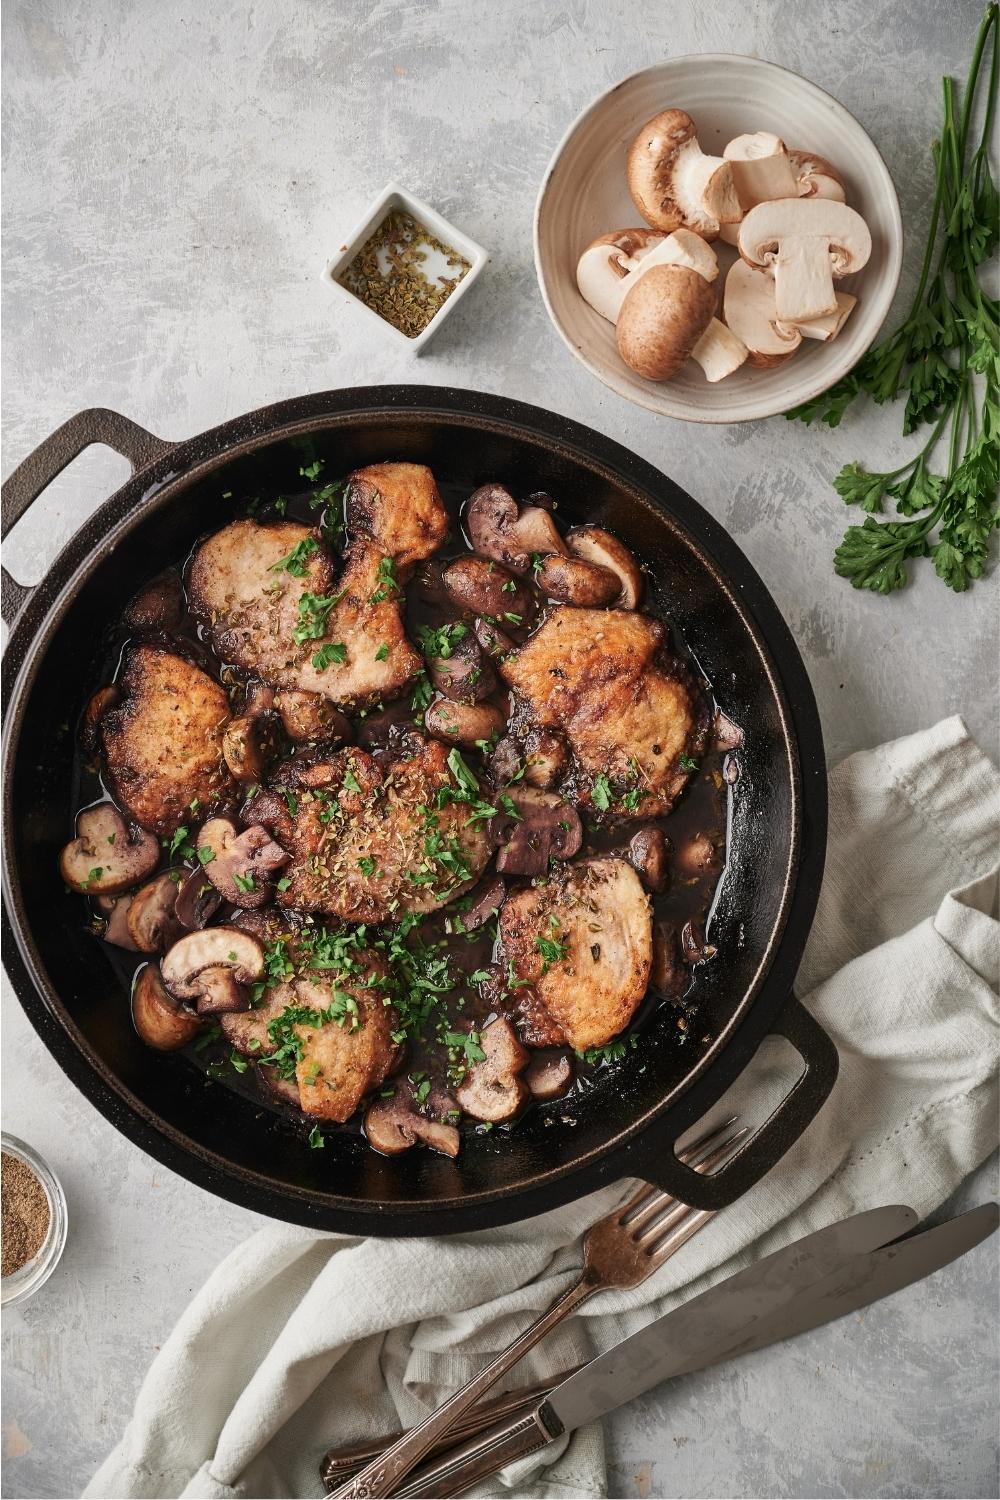 Cooked chicken marsala in a cast iron pan with a napkin, fork, knife, parsley sprigs, a bowl of raw mushrooms, and oregano all surrounding the pan.